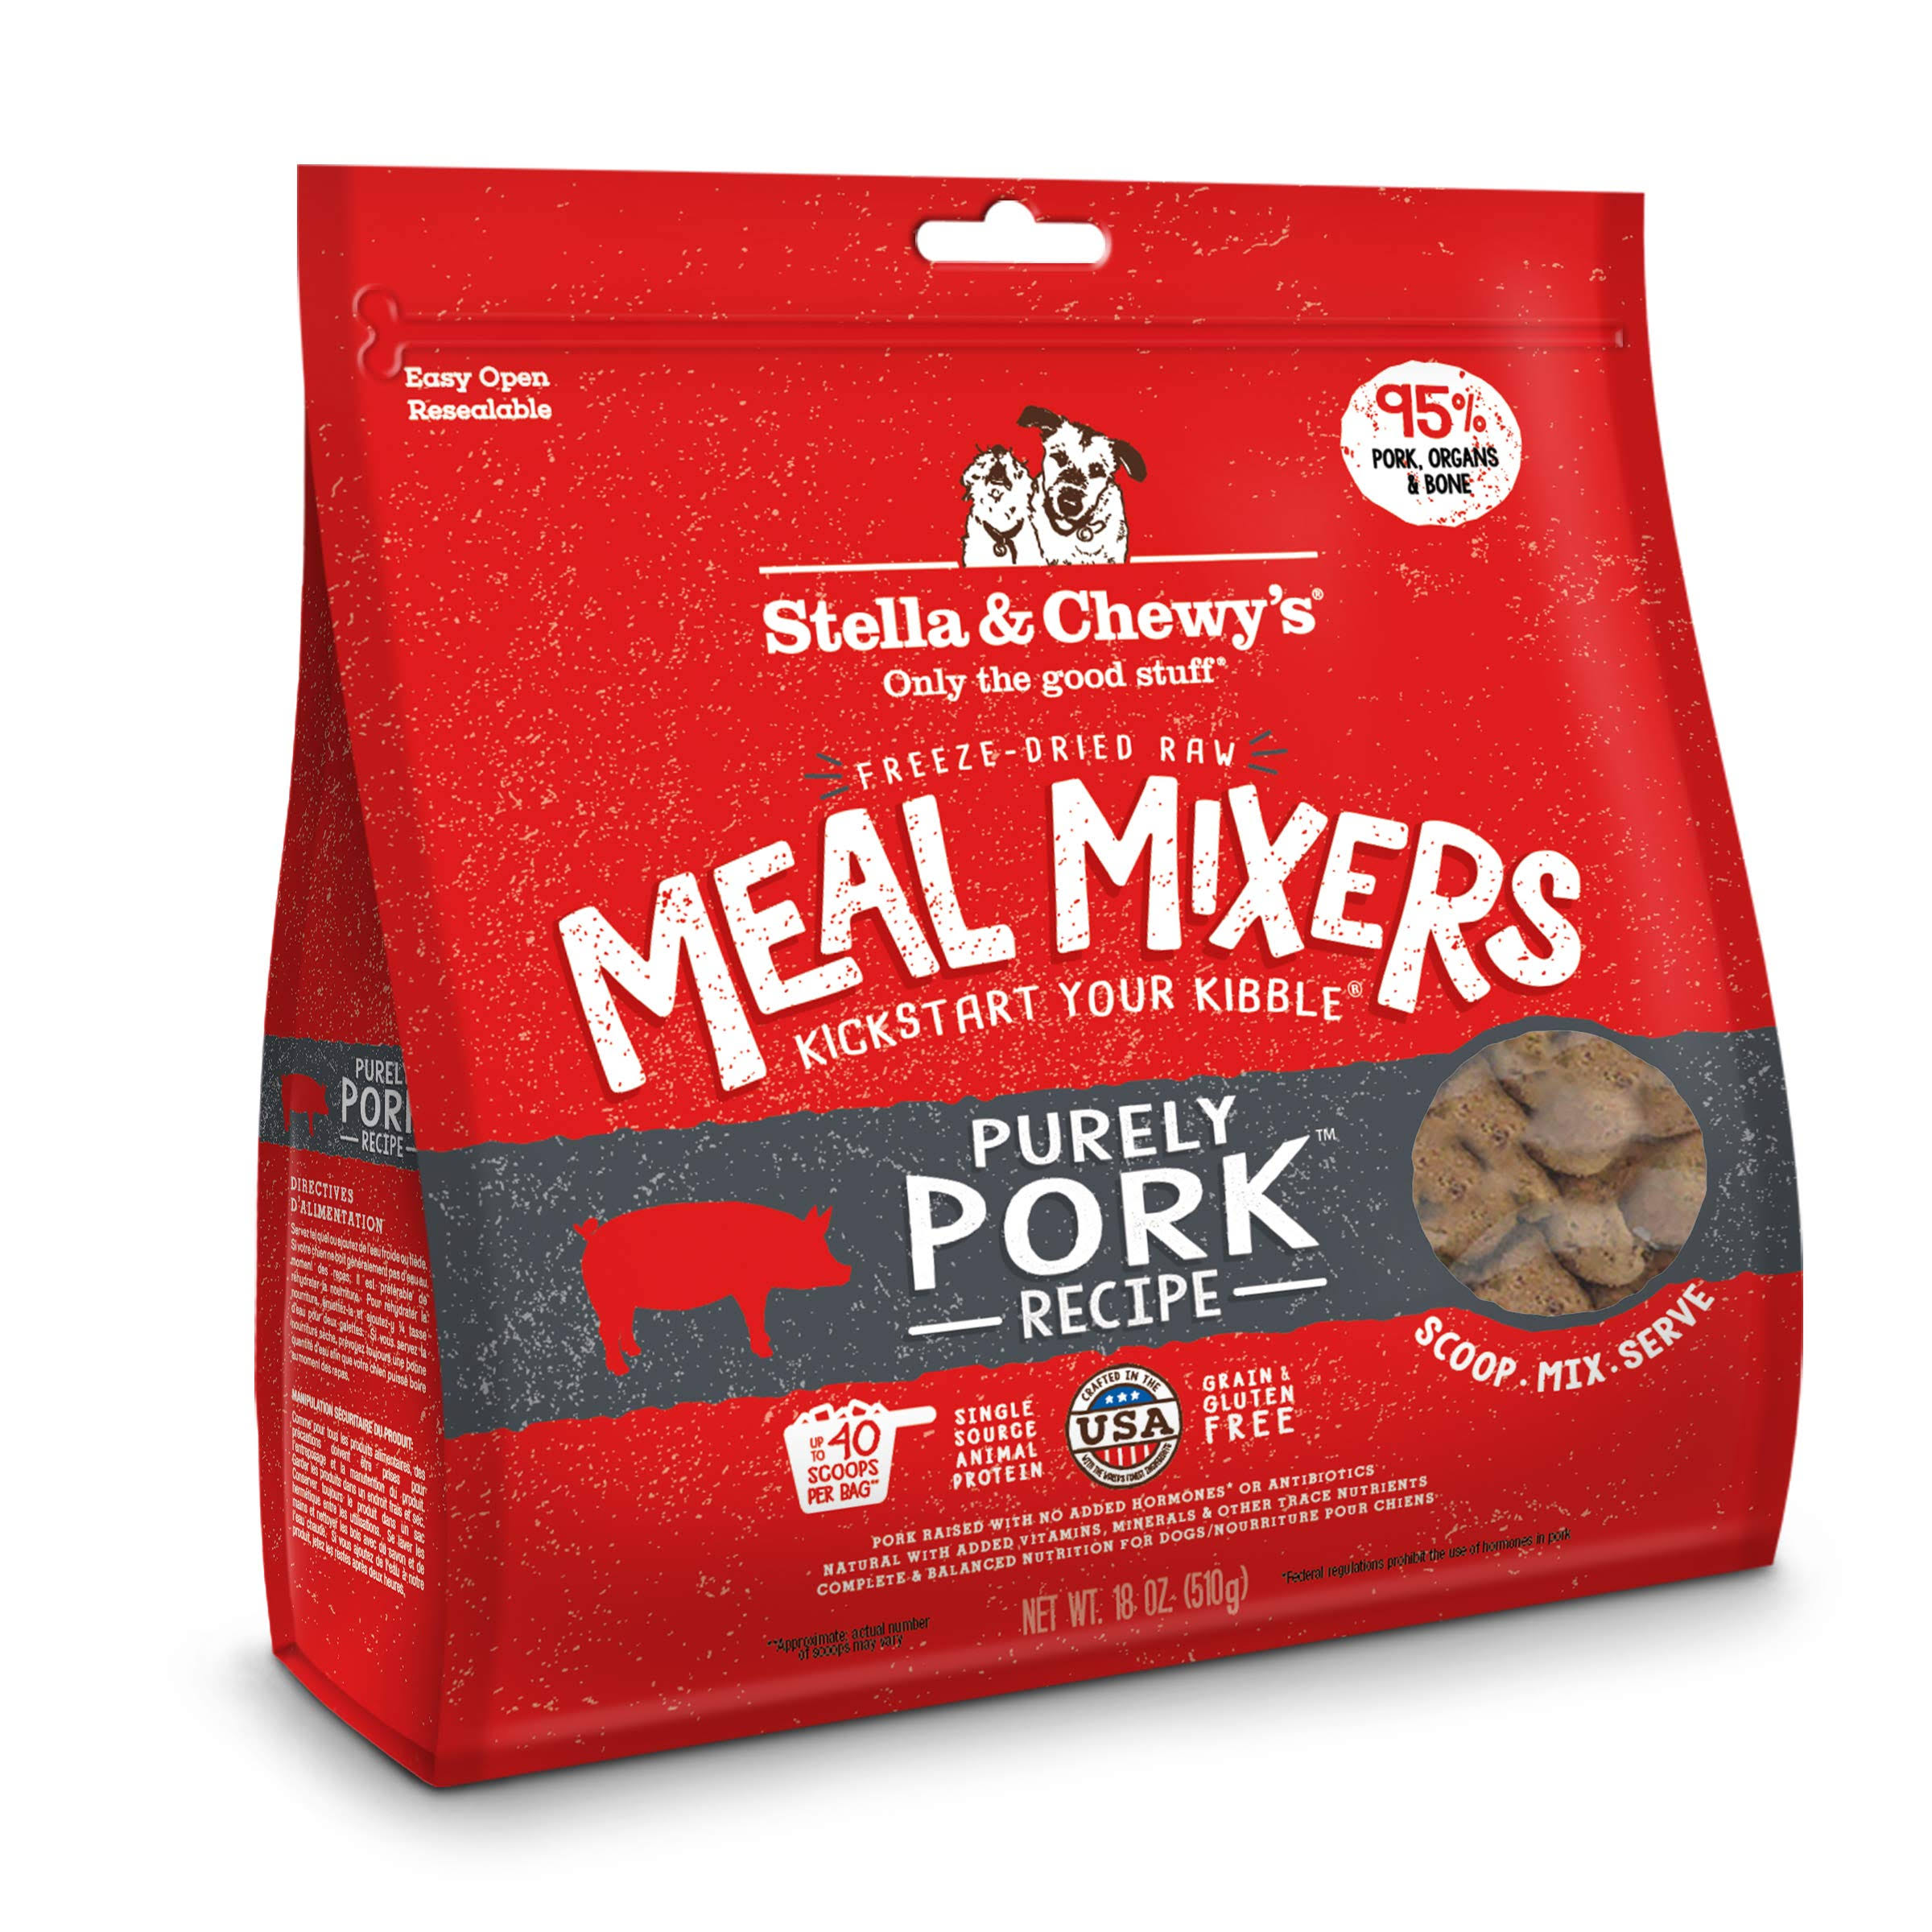 Stella & Chewy's Dog Freeze-Dried Raw, Purely Pork Meal Mixers, 18 Ounces